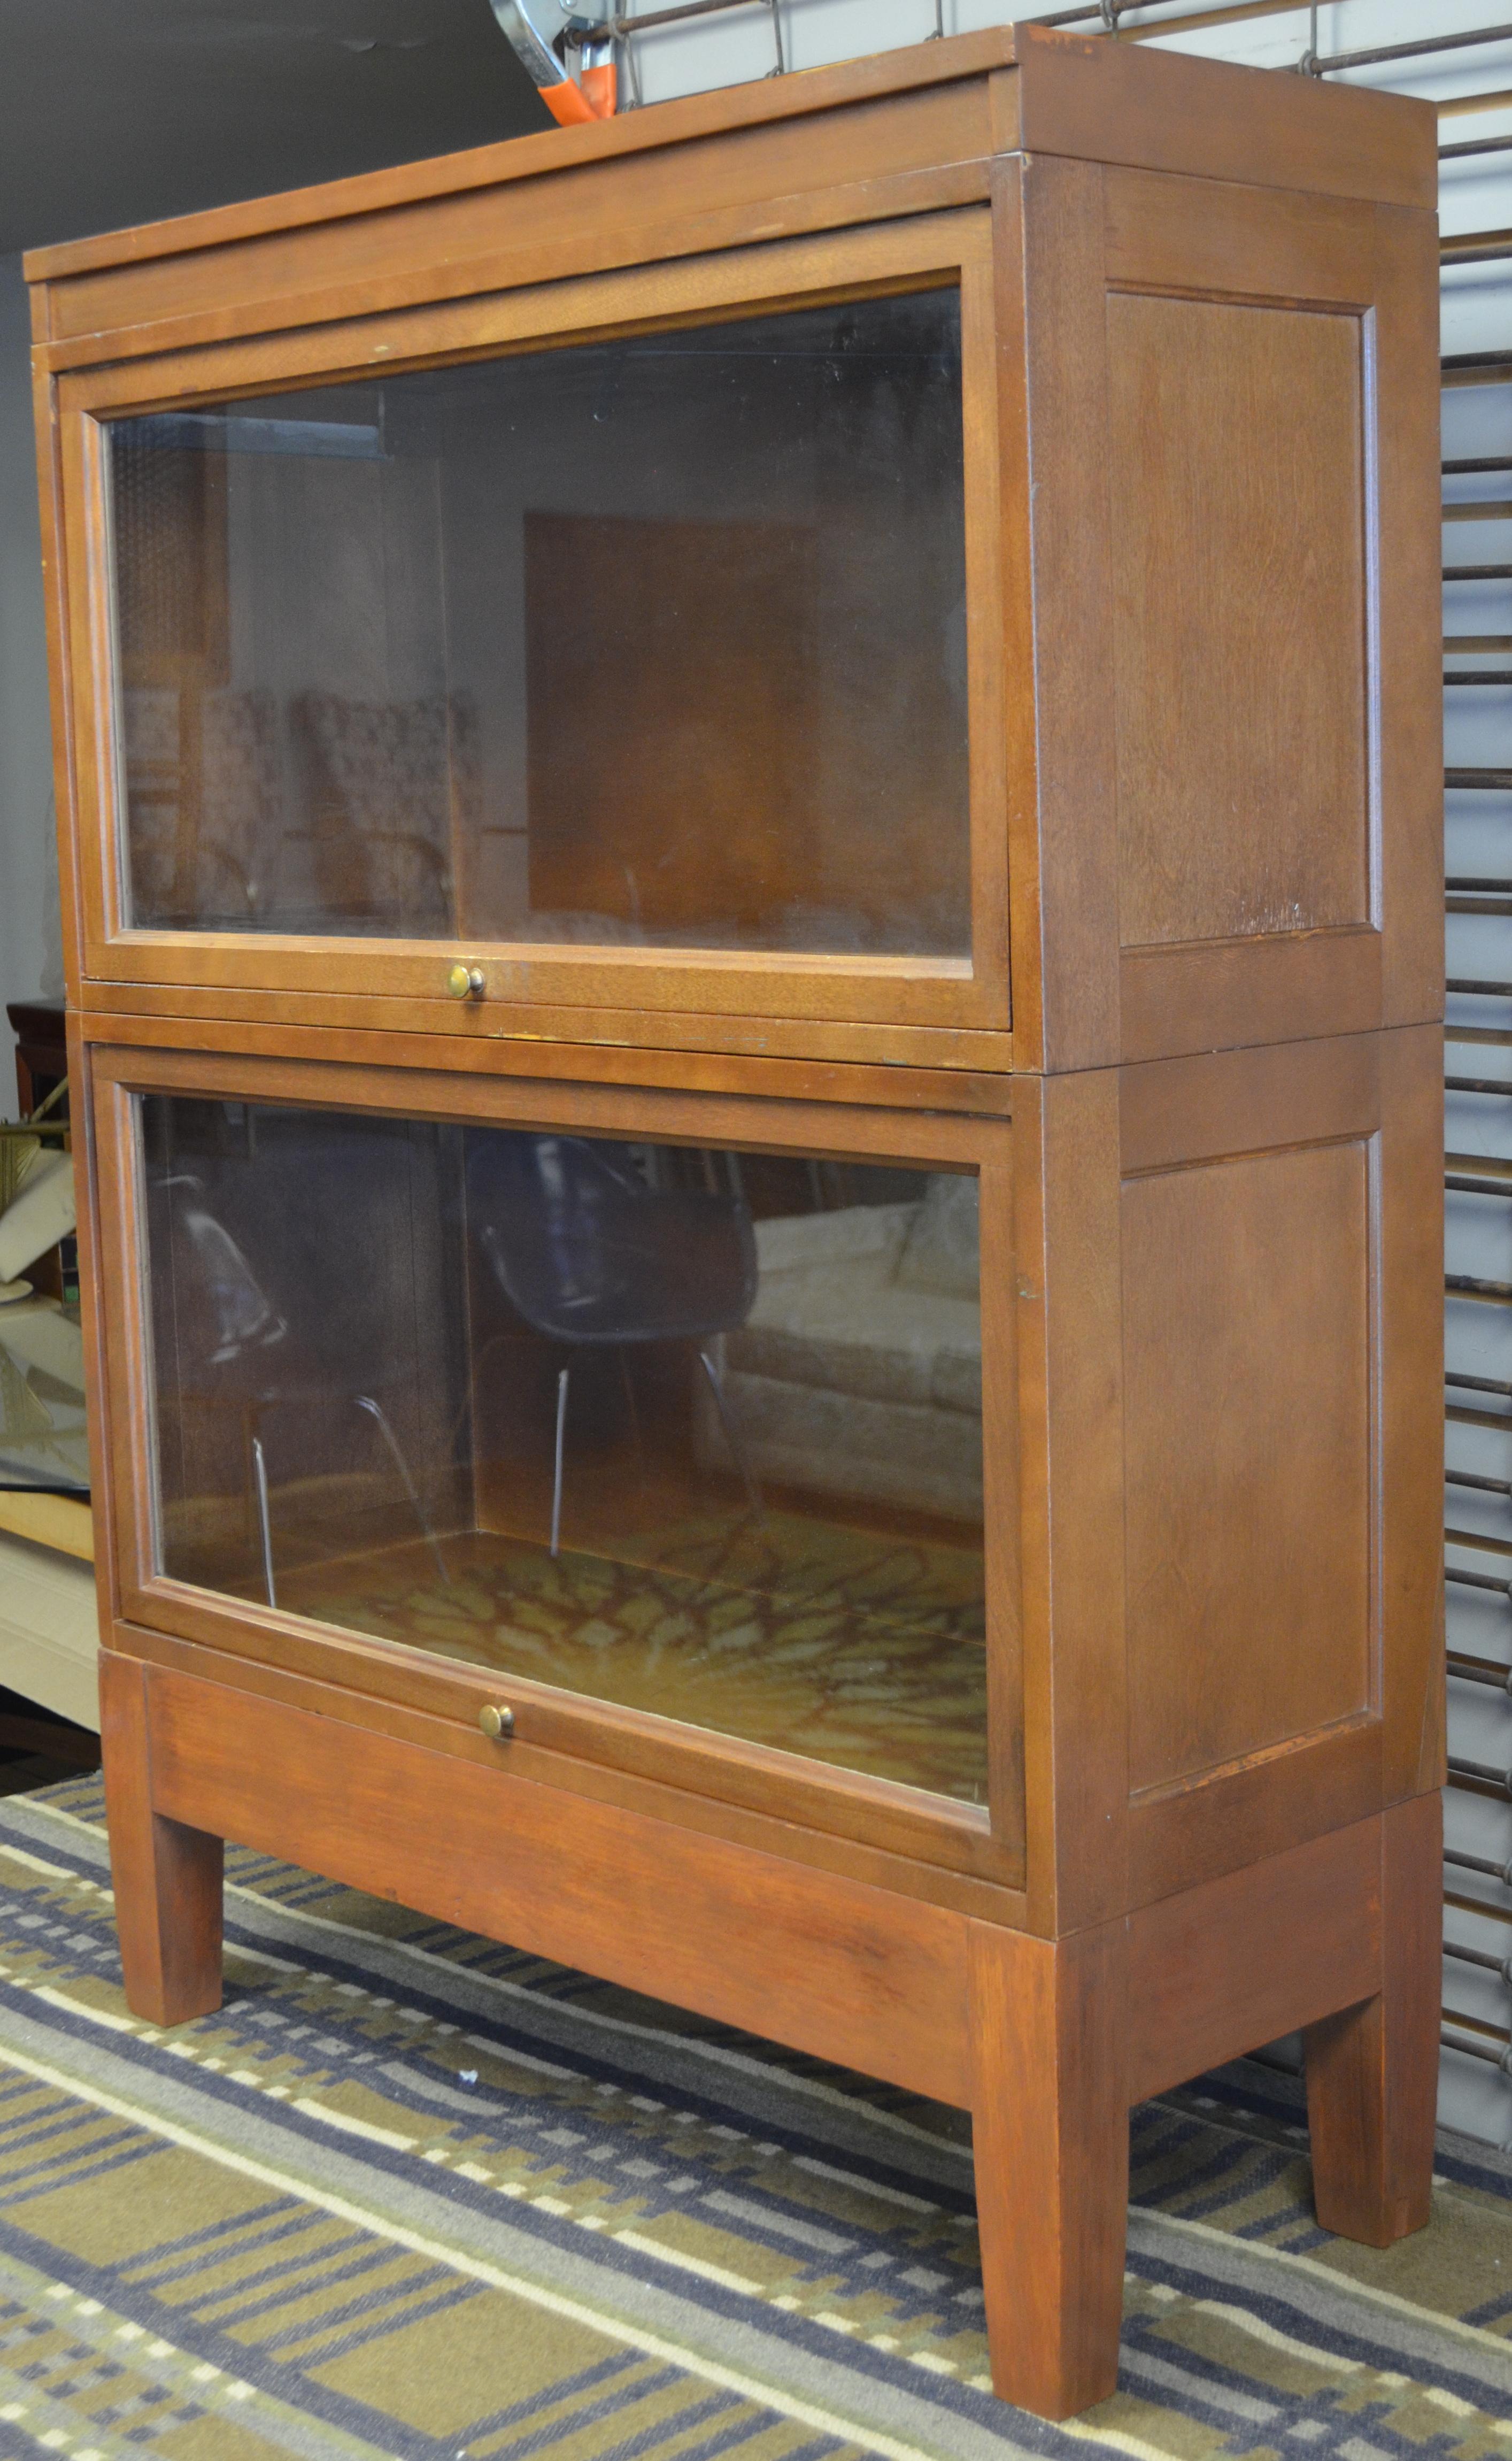 Storage cabinet, lawyer's barrister of wood and glass. Two stacking units with base and top. Glass fronts with brass knobs are retractable on sliders, lift up and gently push in. Work smoothly. Excellent vintage condition with character patina of